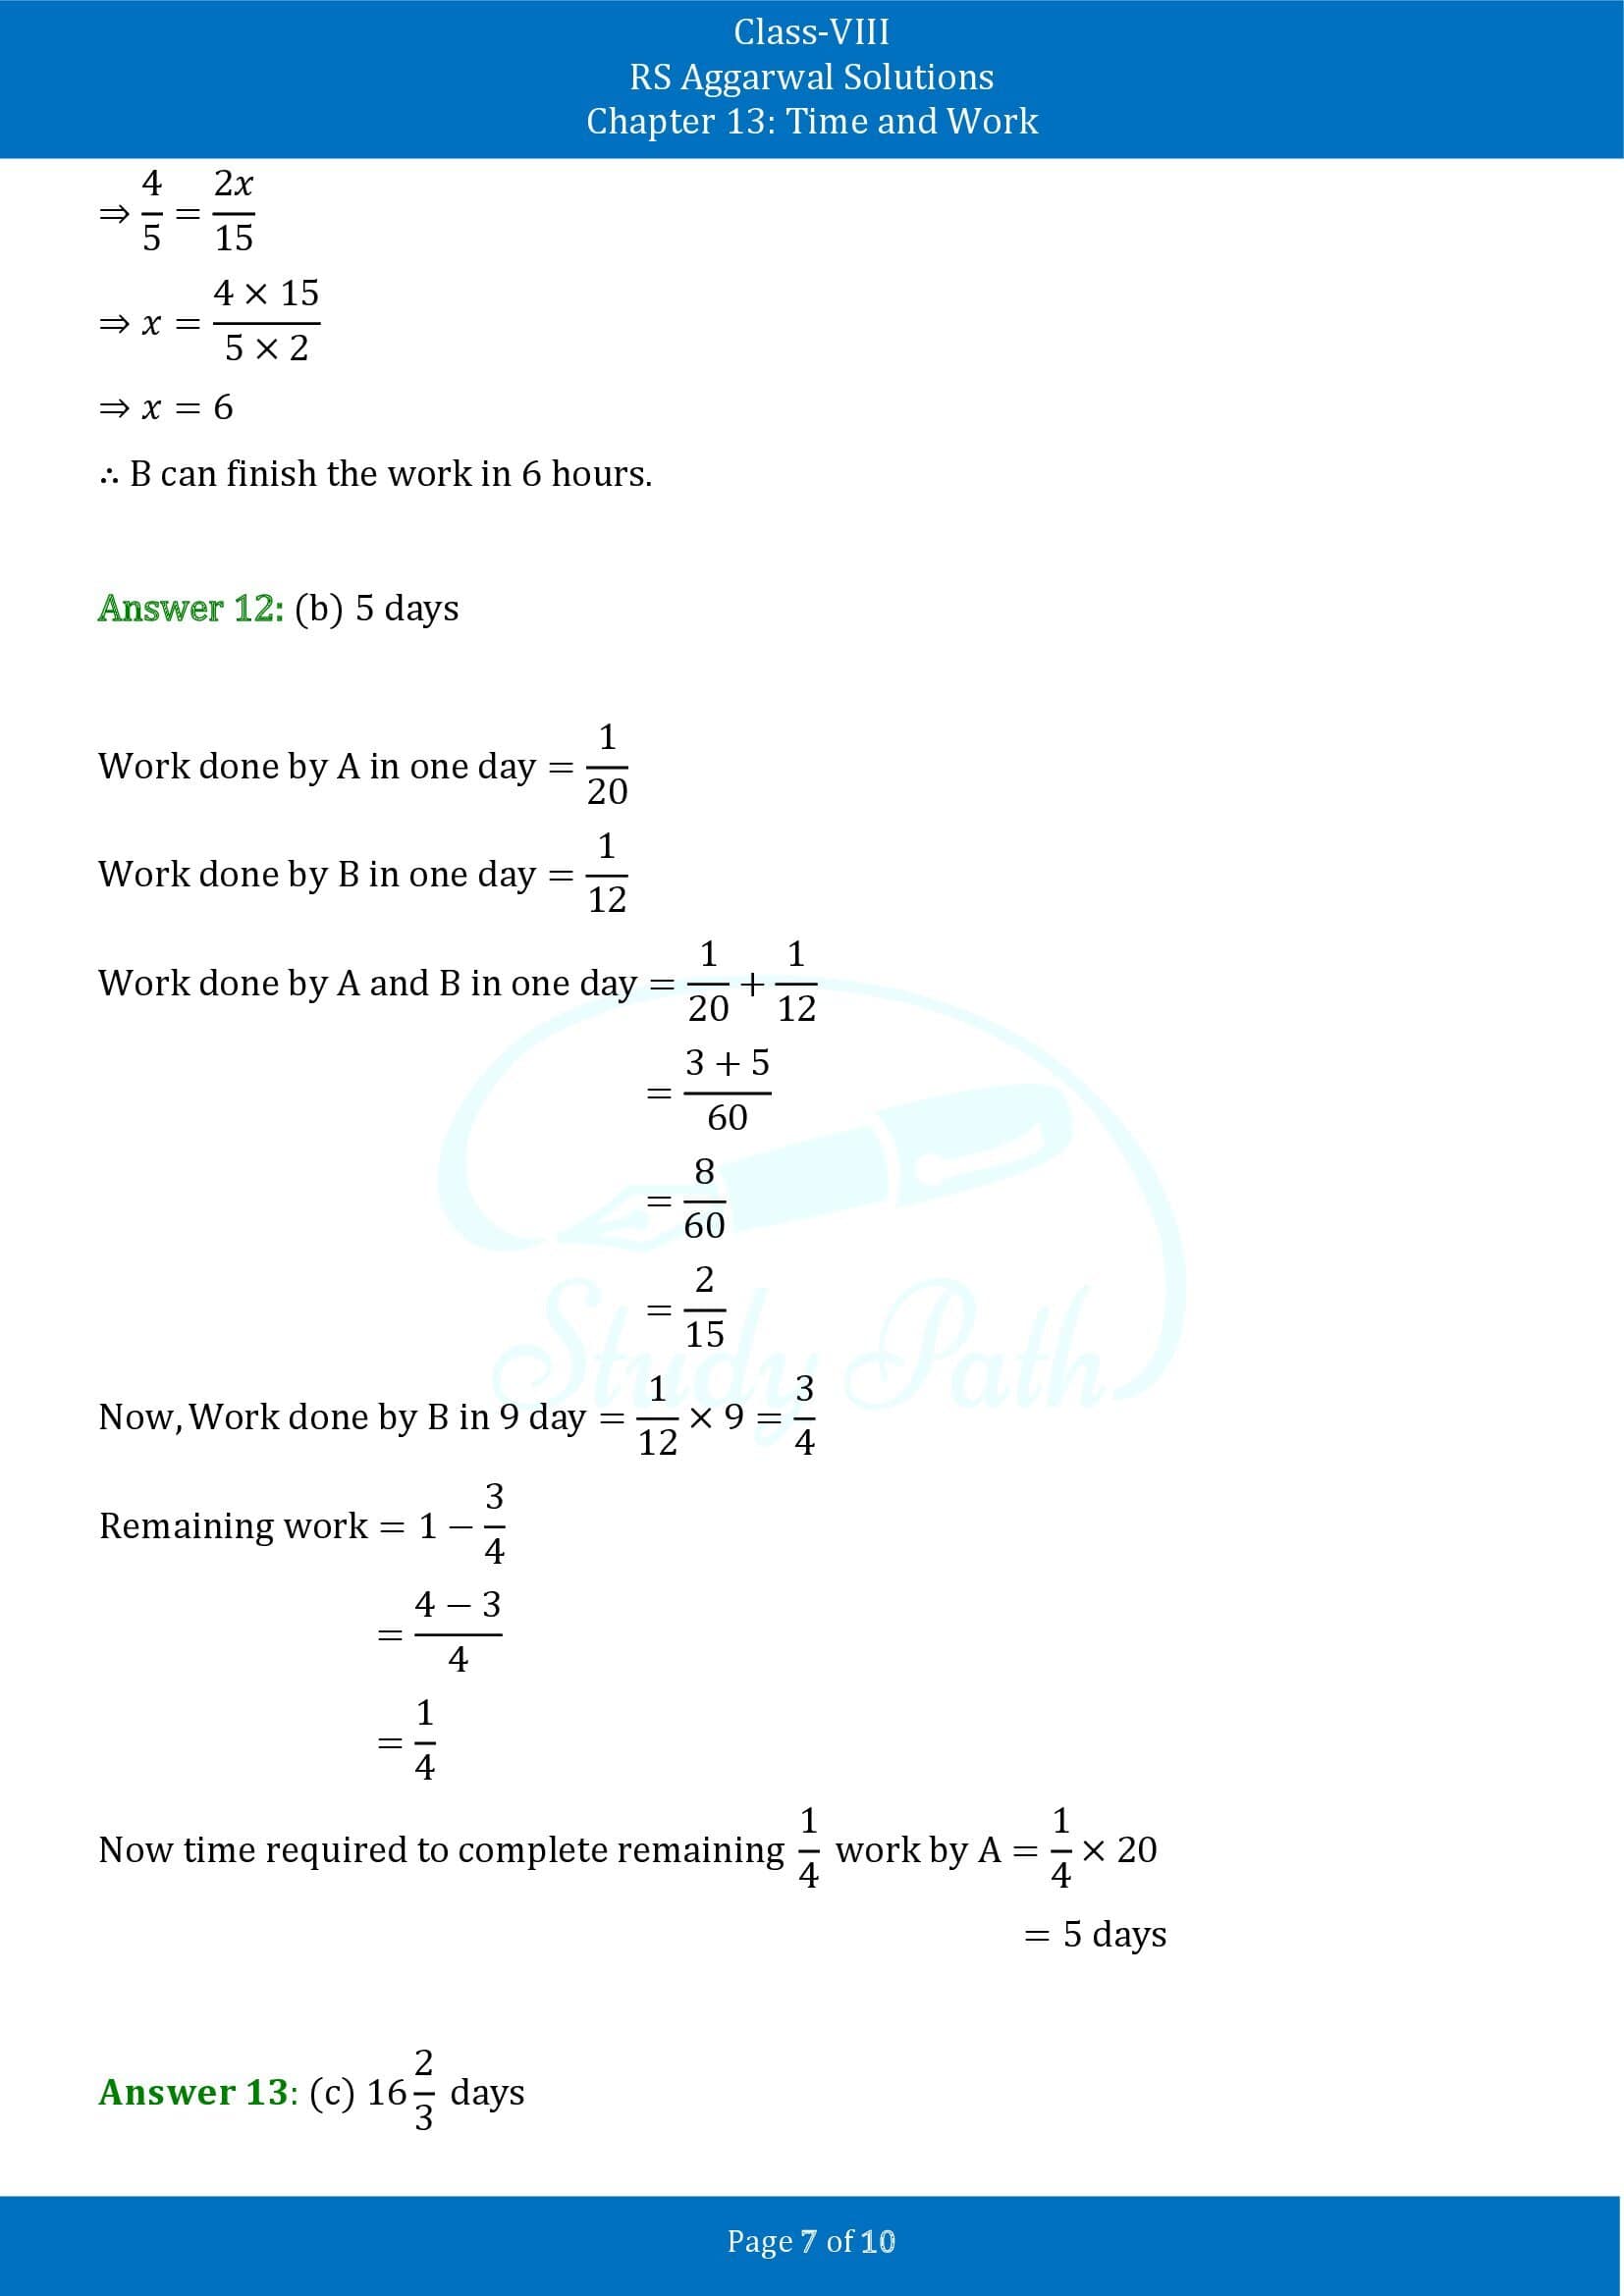 RS Aggarwal Solutions Class 8 Chapter 13 Time and Work Exercise 13B MCQs 00007